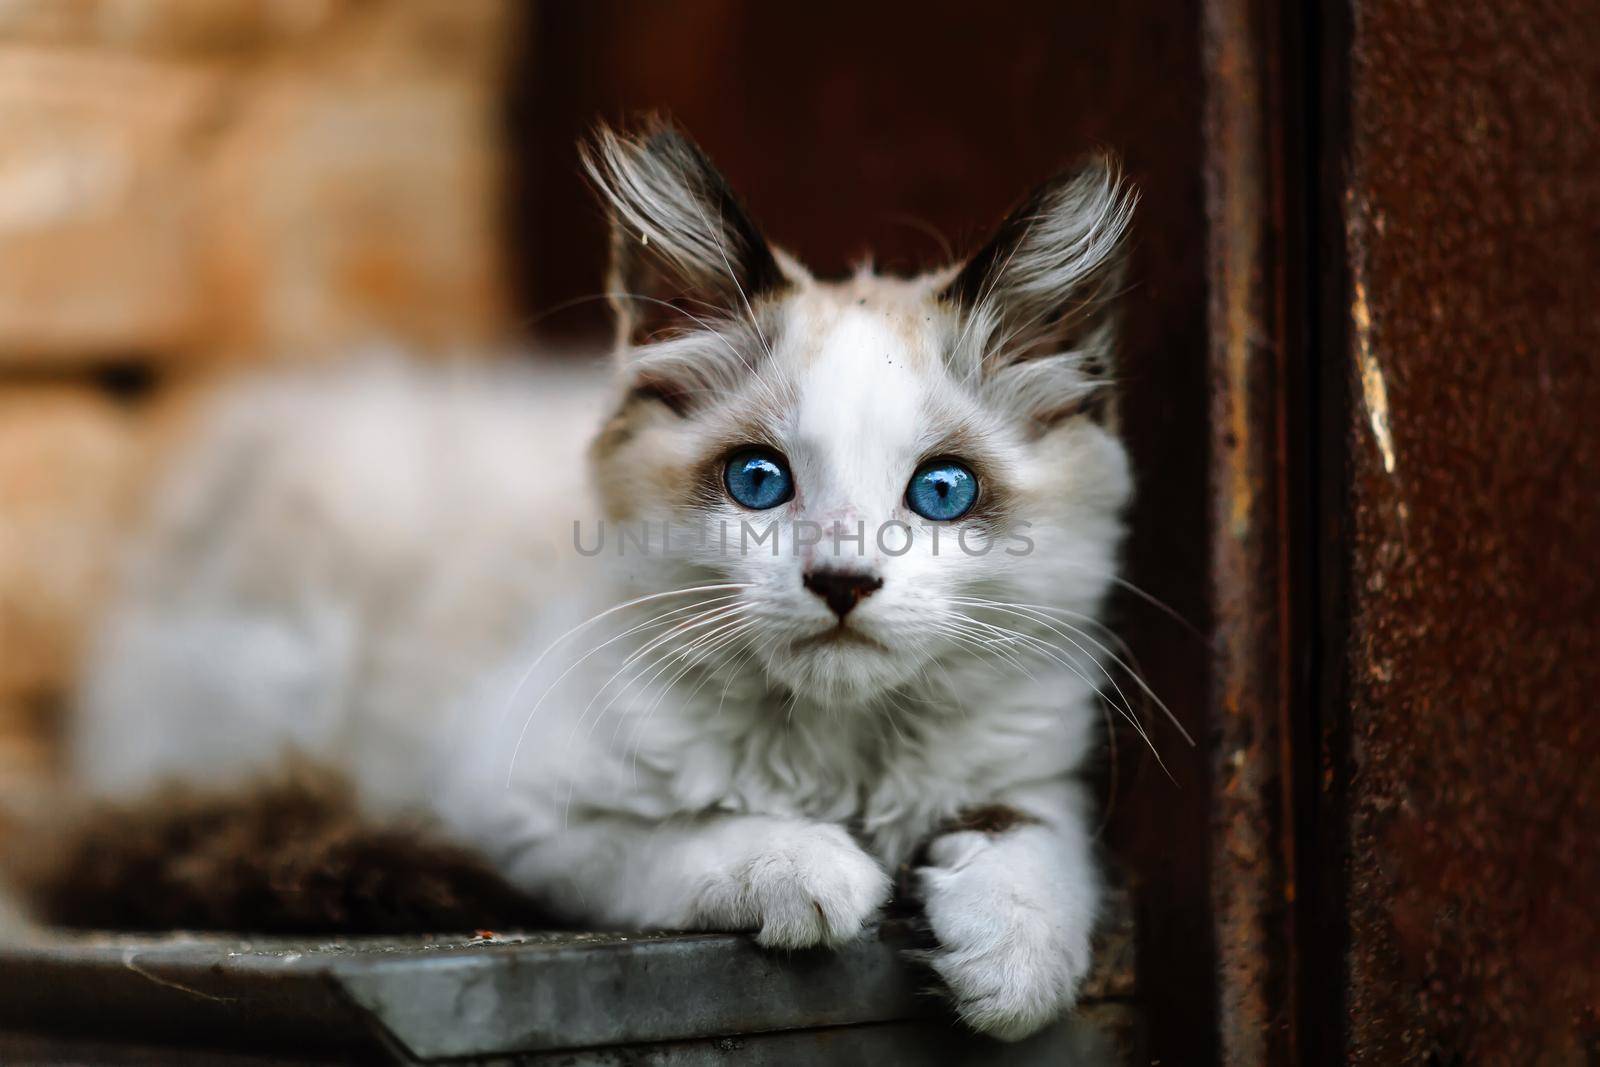 Homeless grimy little white kitten portrait. A beautiful cat with blue eyes. Animals are homeless. Small depth of field.